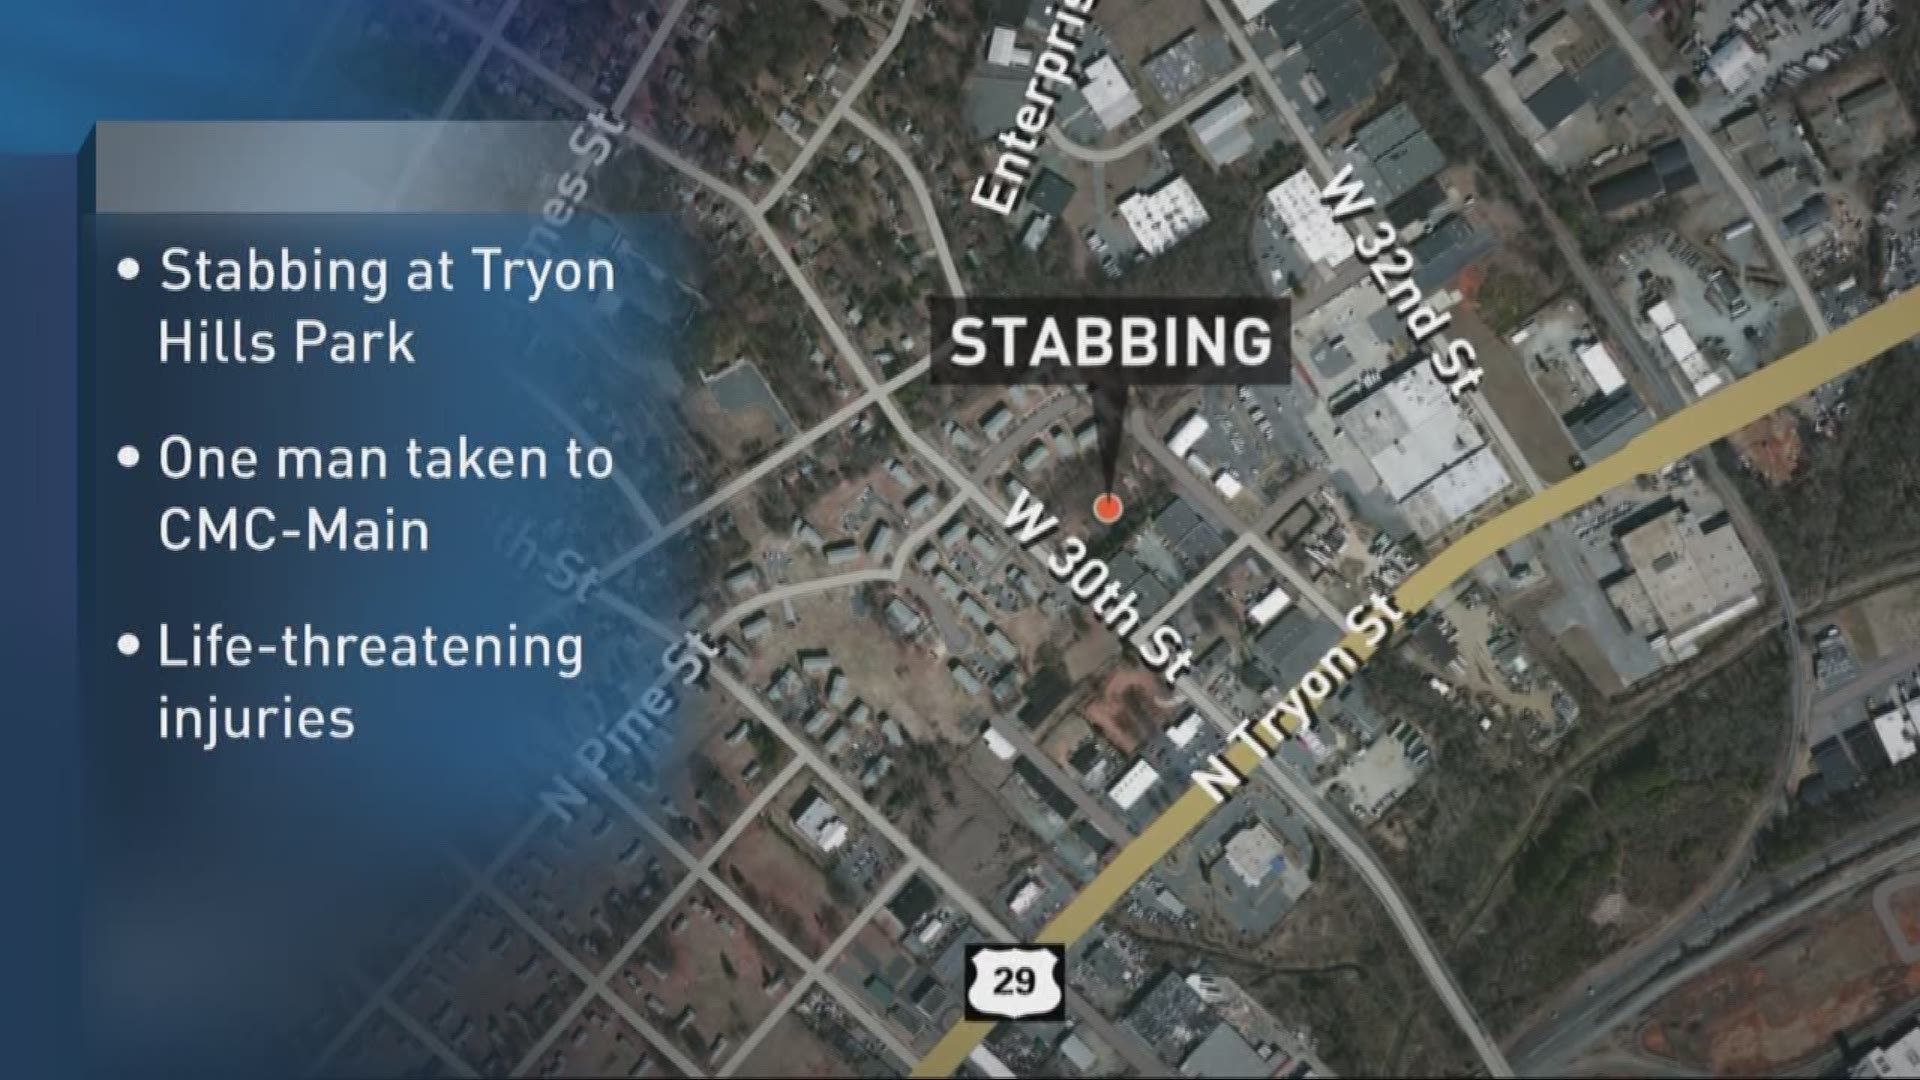 Charlotte-Mecklenburg Police says a man was hospitalized after a stabbing incident in east Charlotte park Sunday night.